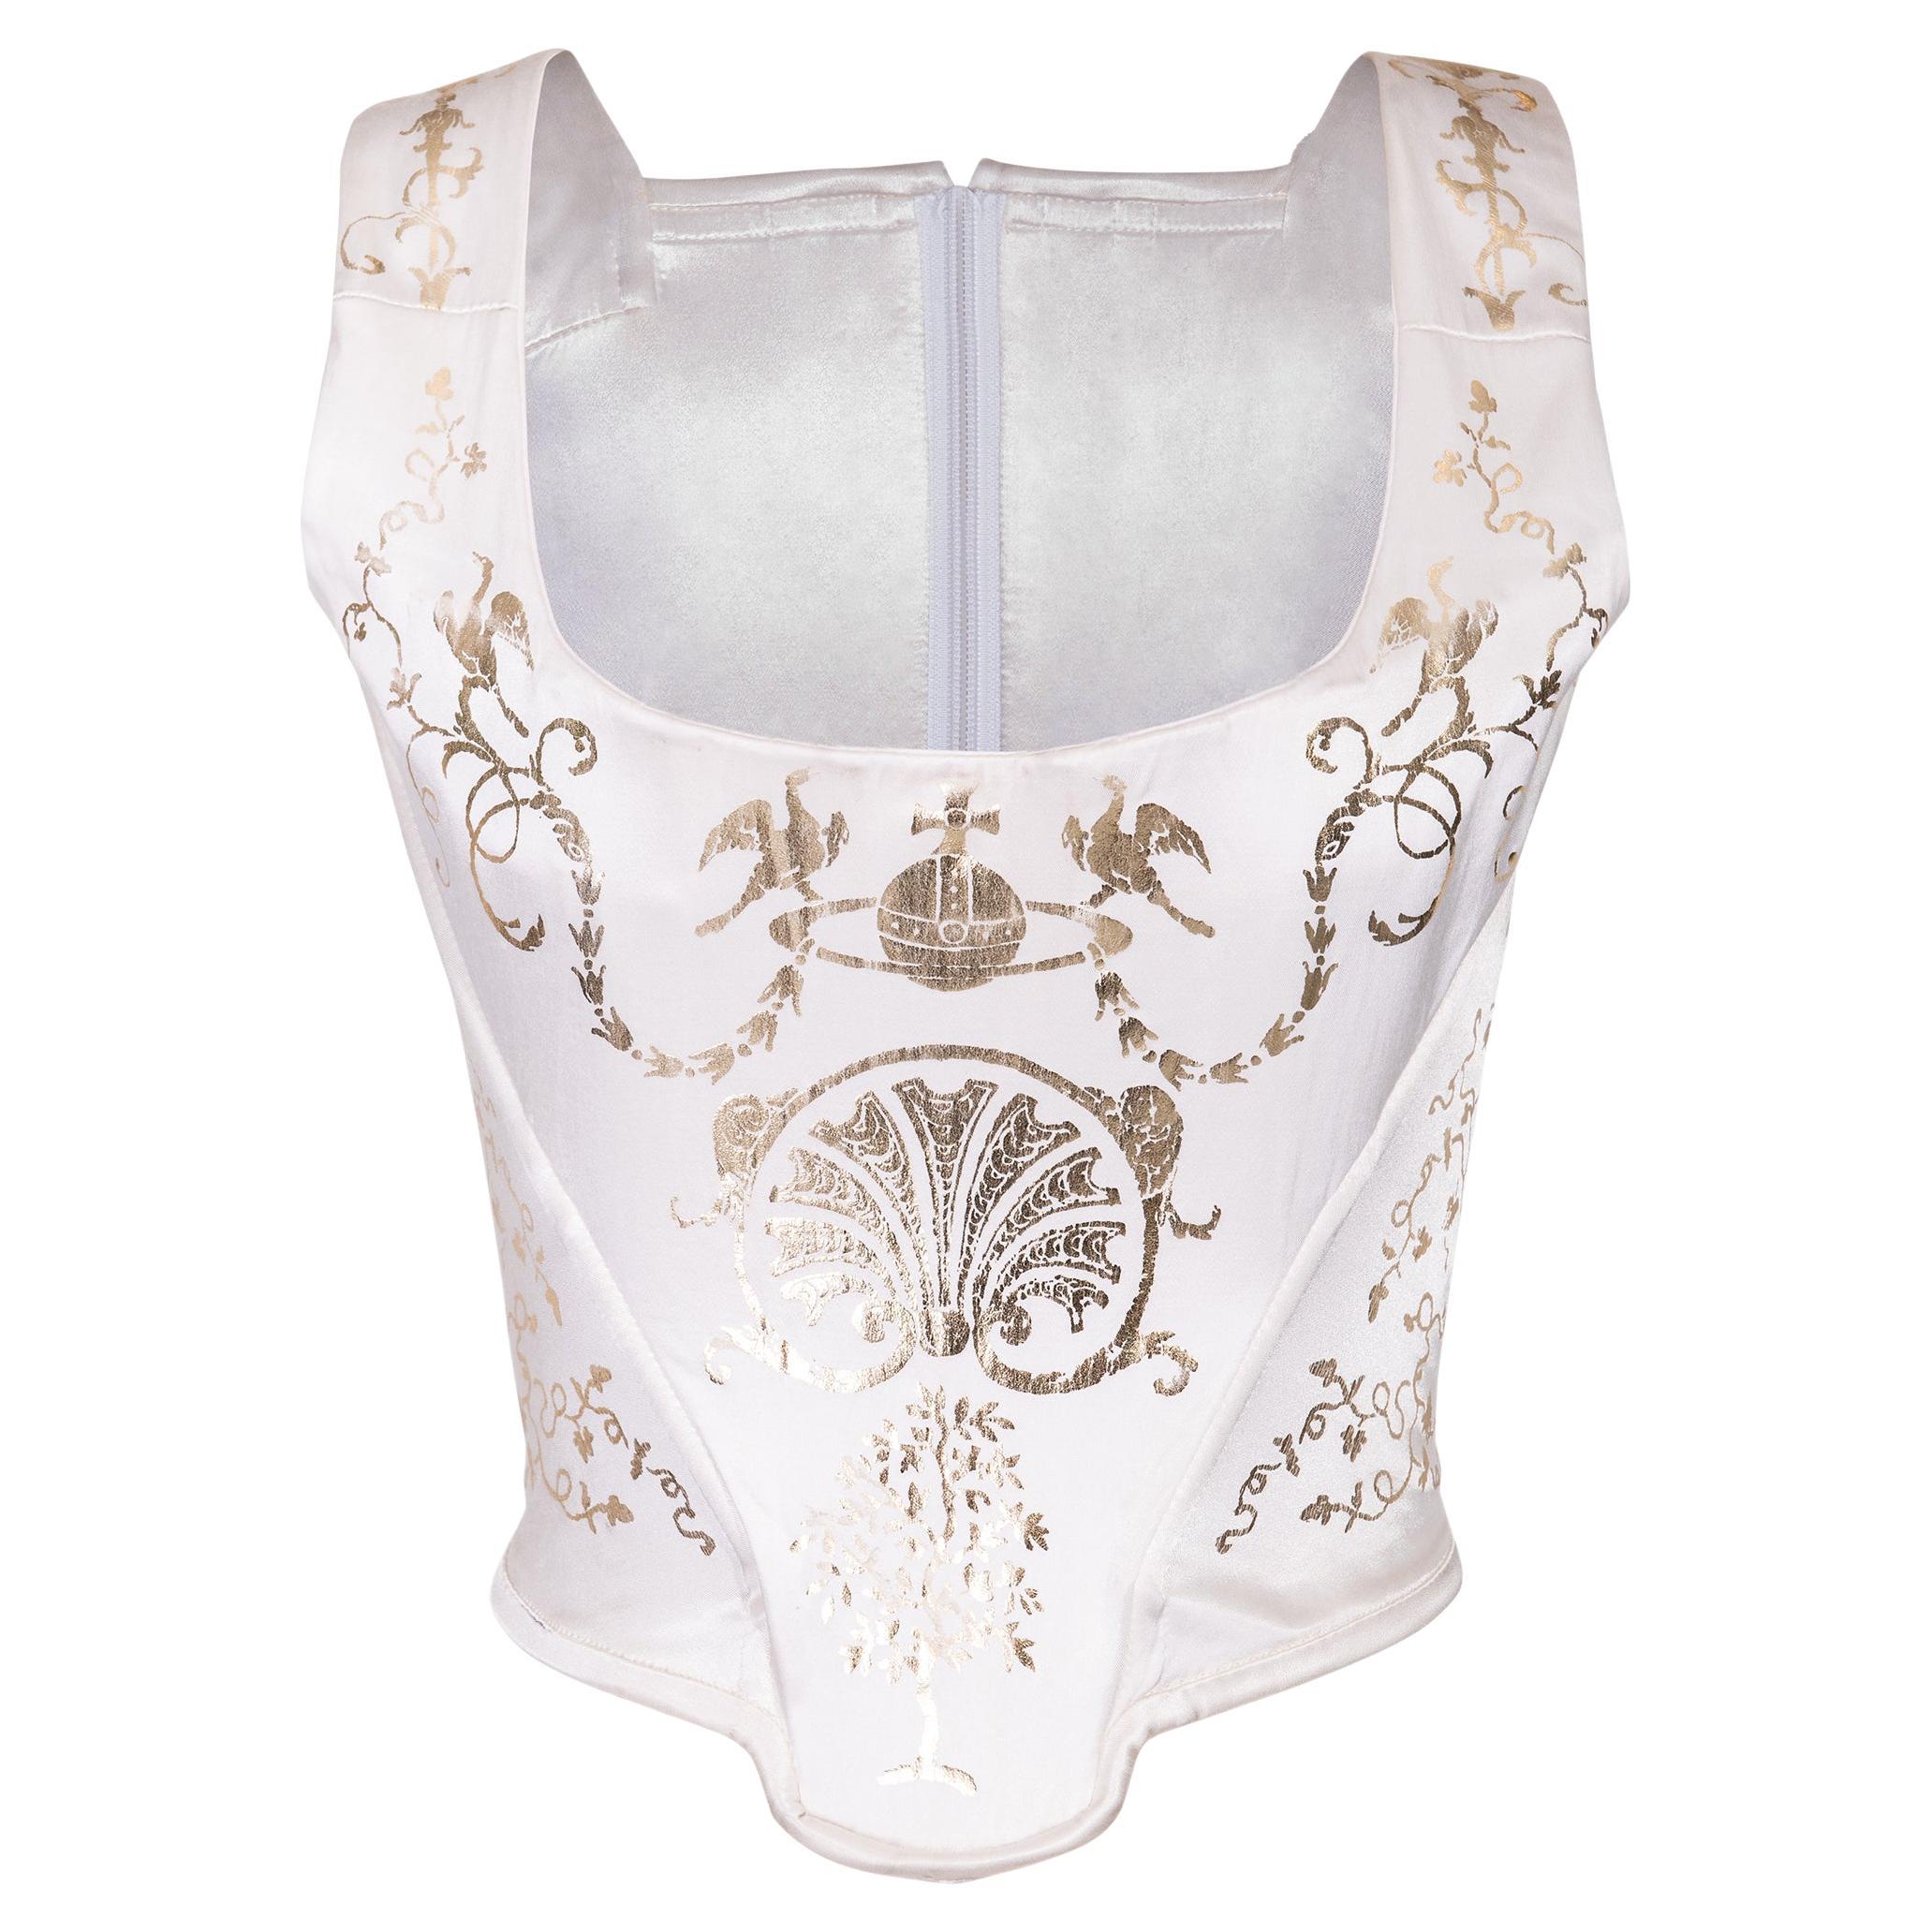 A/W 1991 Vivienne Westwood White and Gold Boulle Print Corset